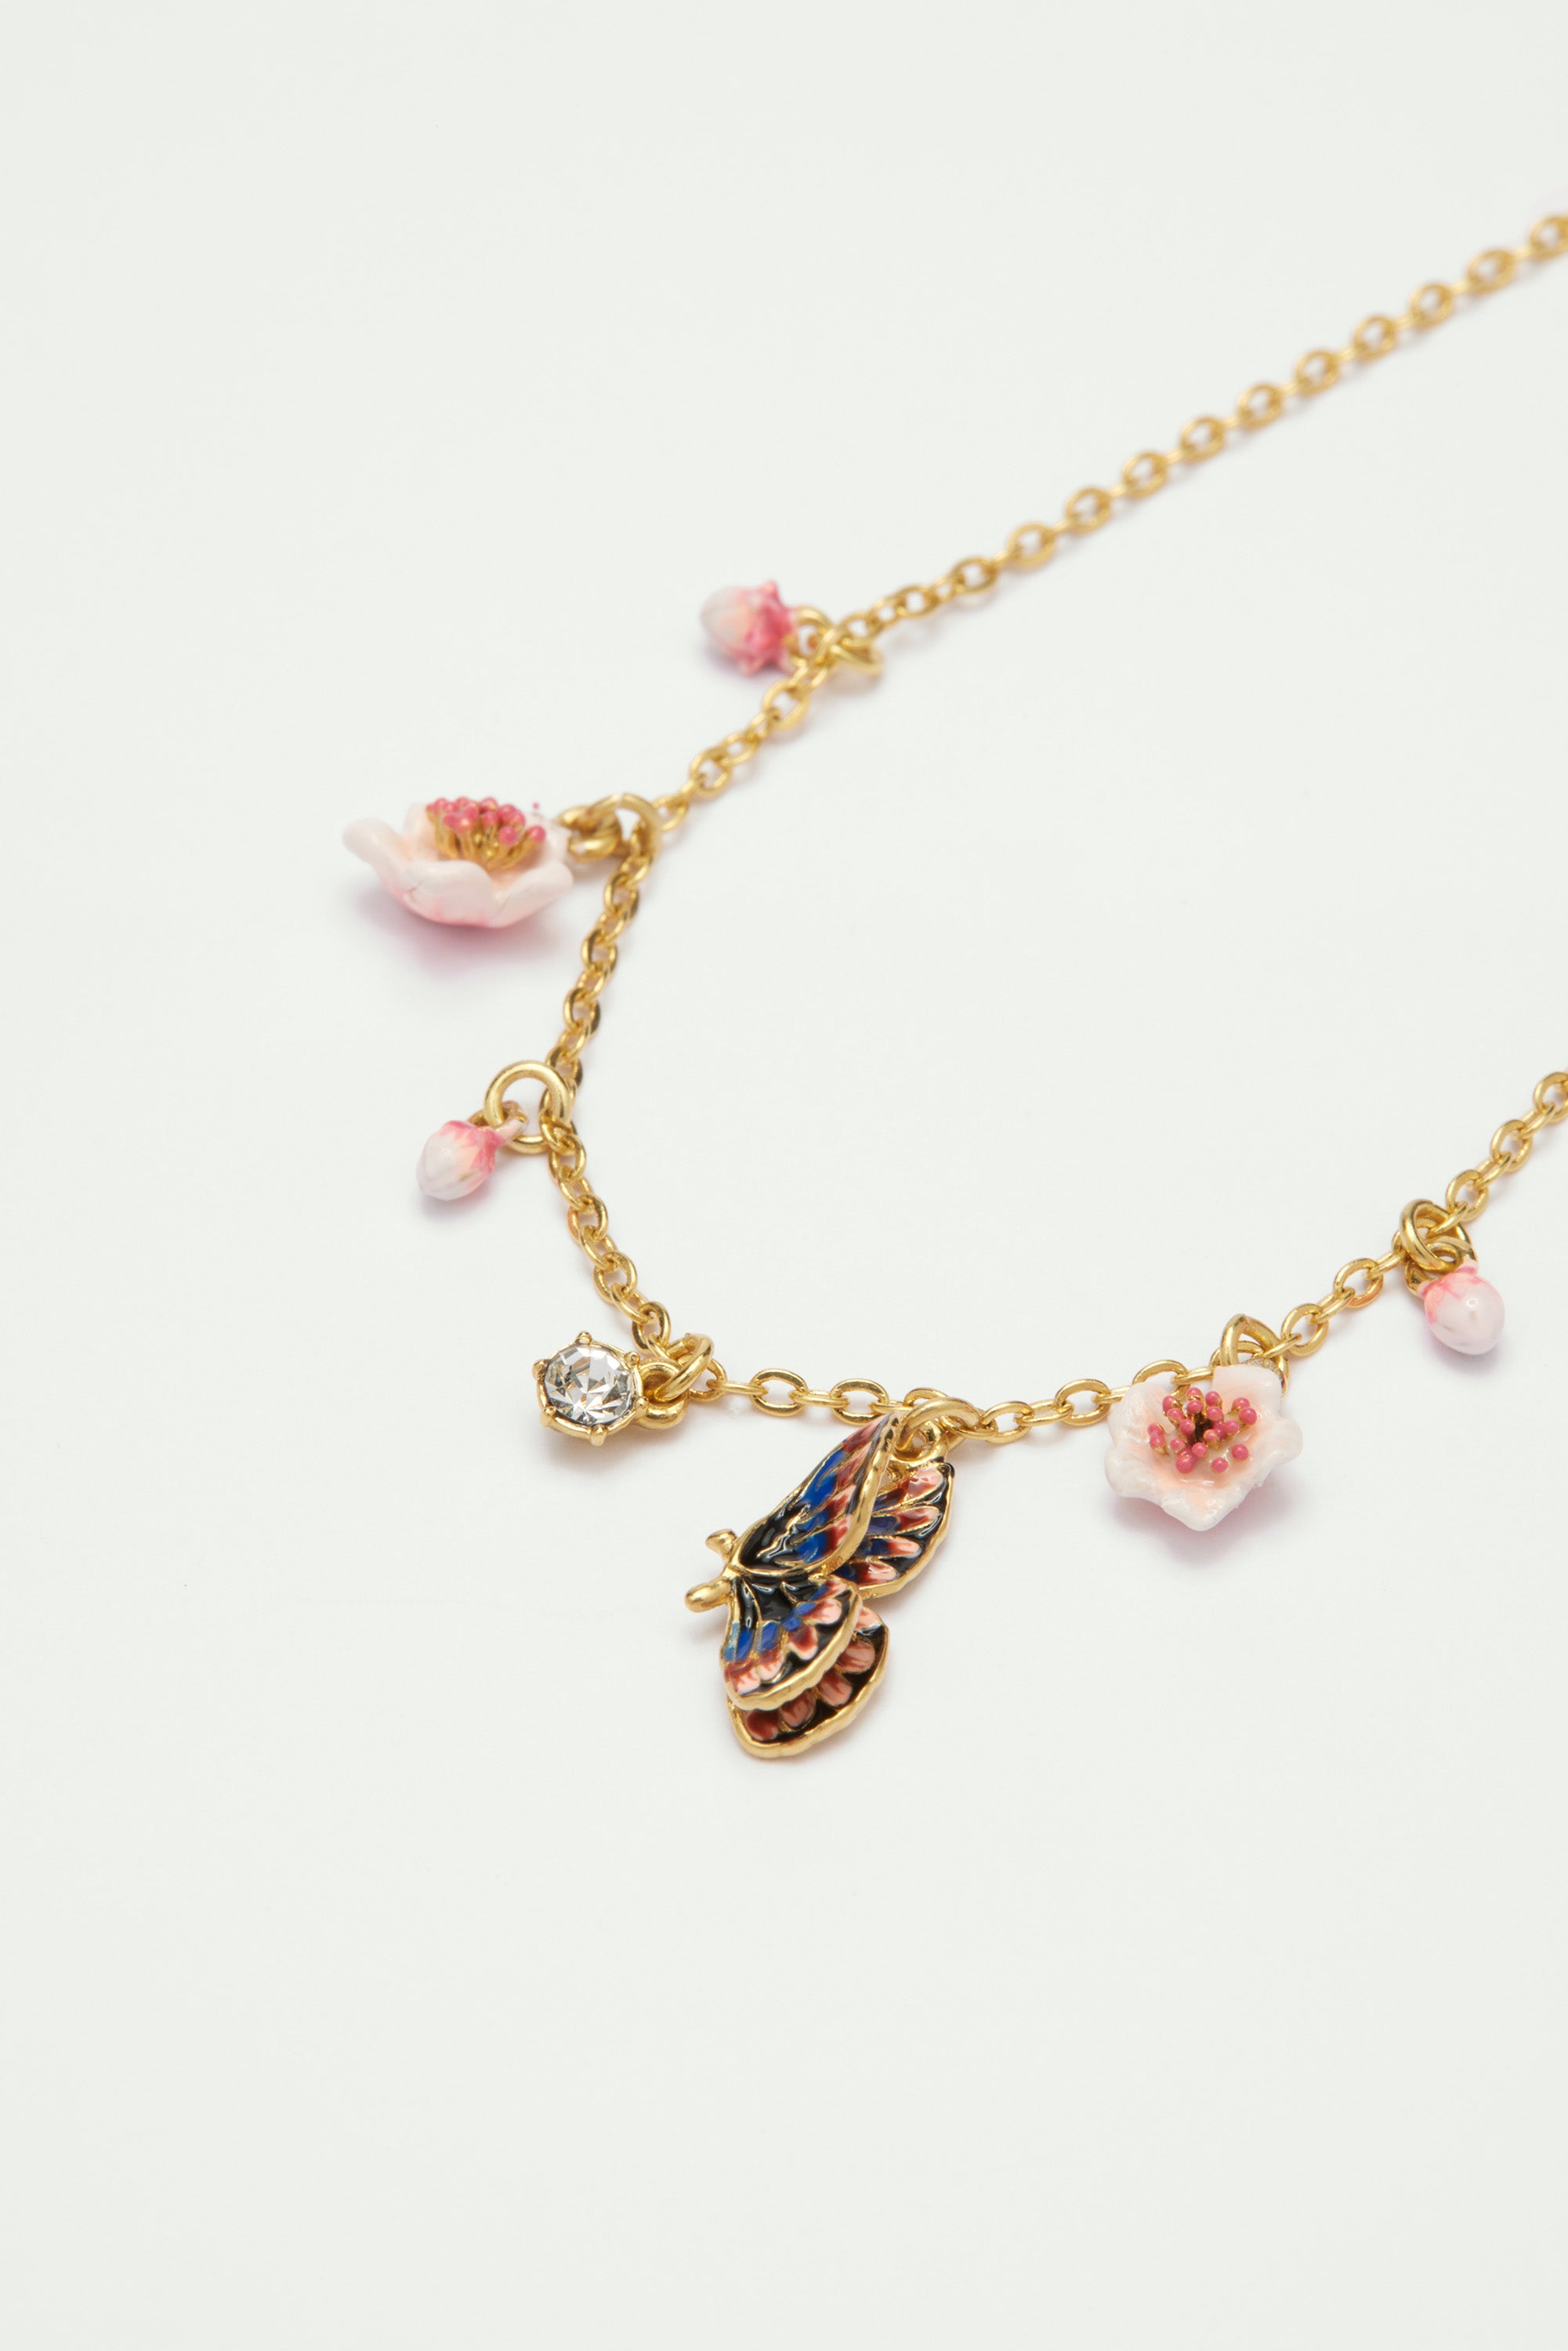 Japanese Emperor butterfly and cherry blossom thin bracelet